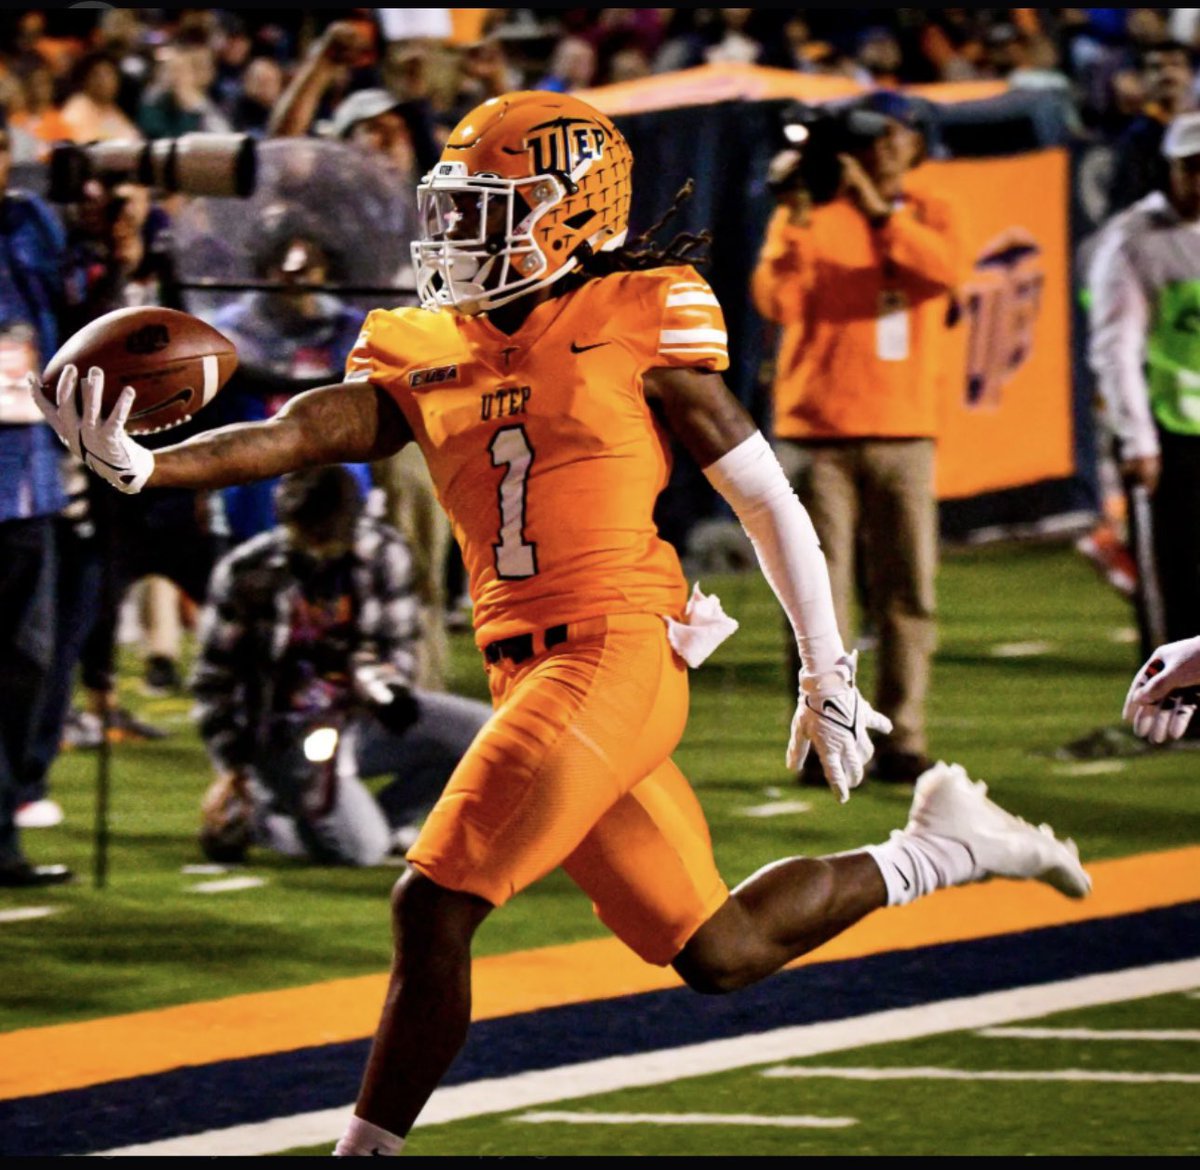 After a Great conversation with @COACHJMACRB I am blessed to receive a offer from UTEP🧡 @StanfordGerry @Eric_Sutton4